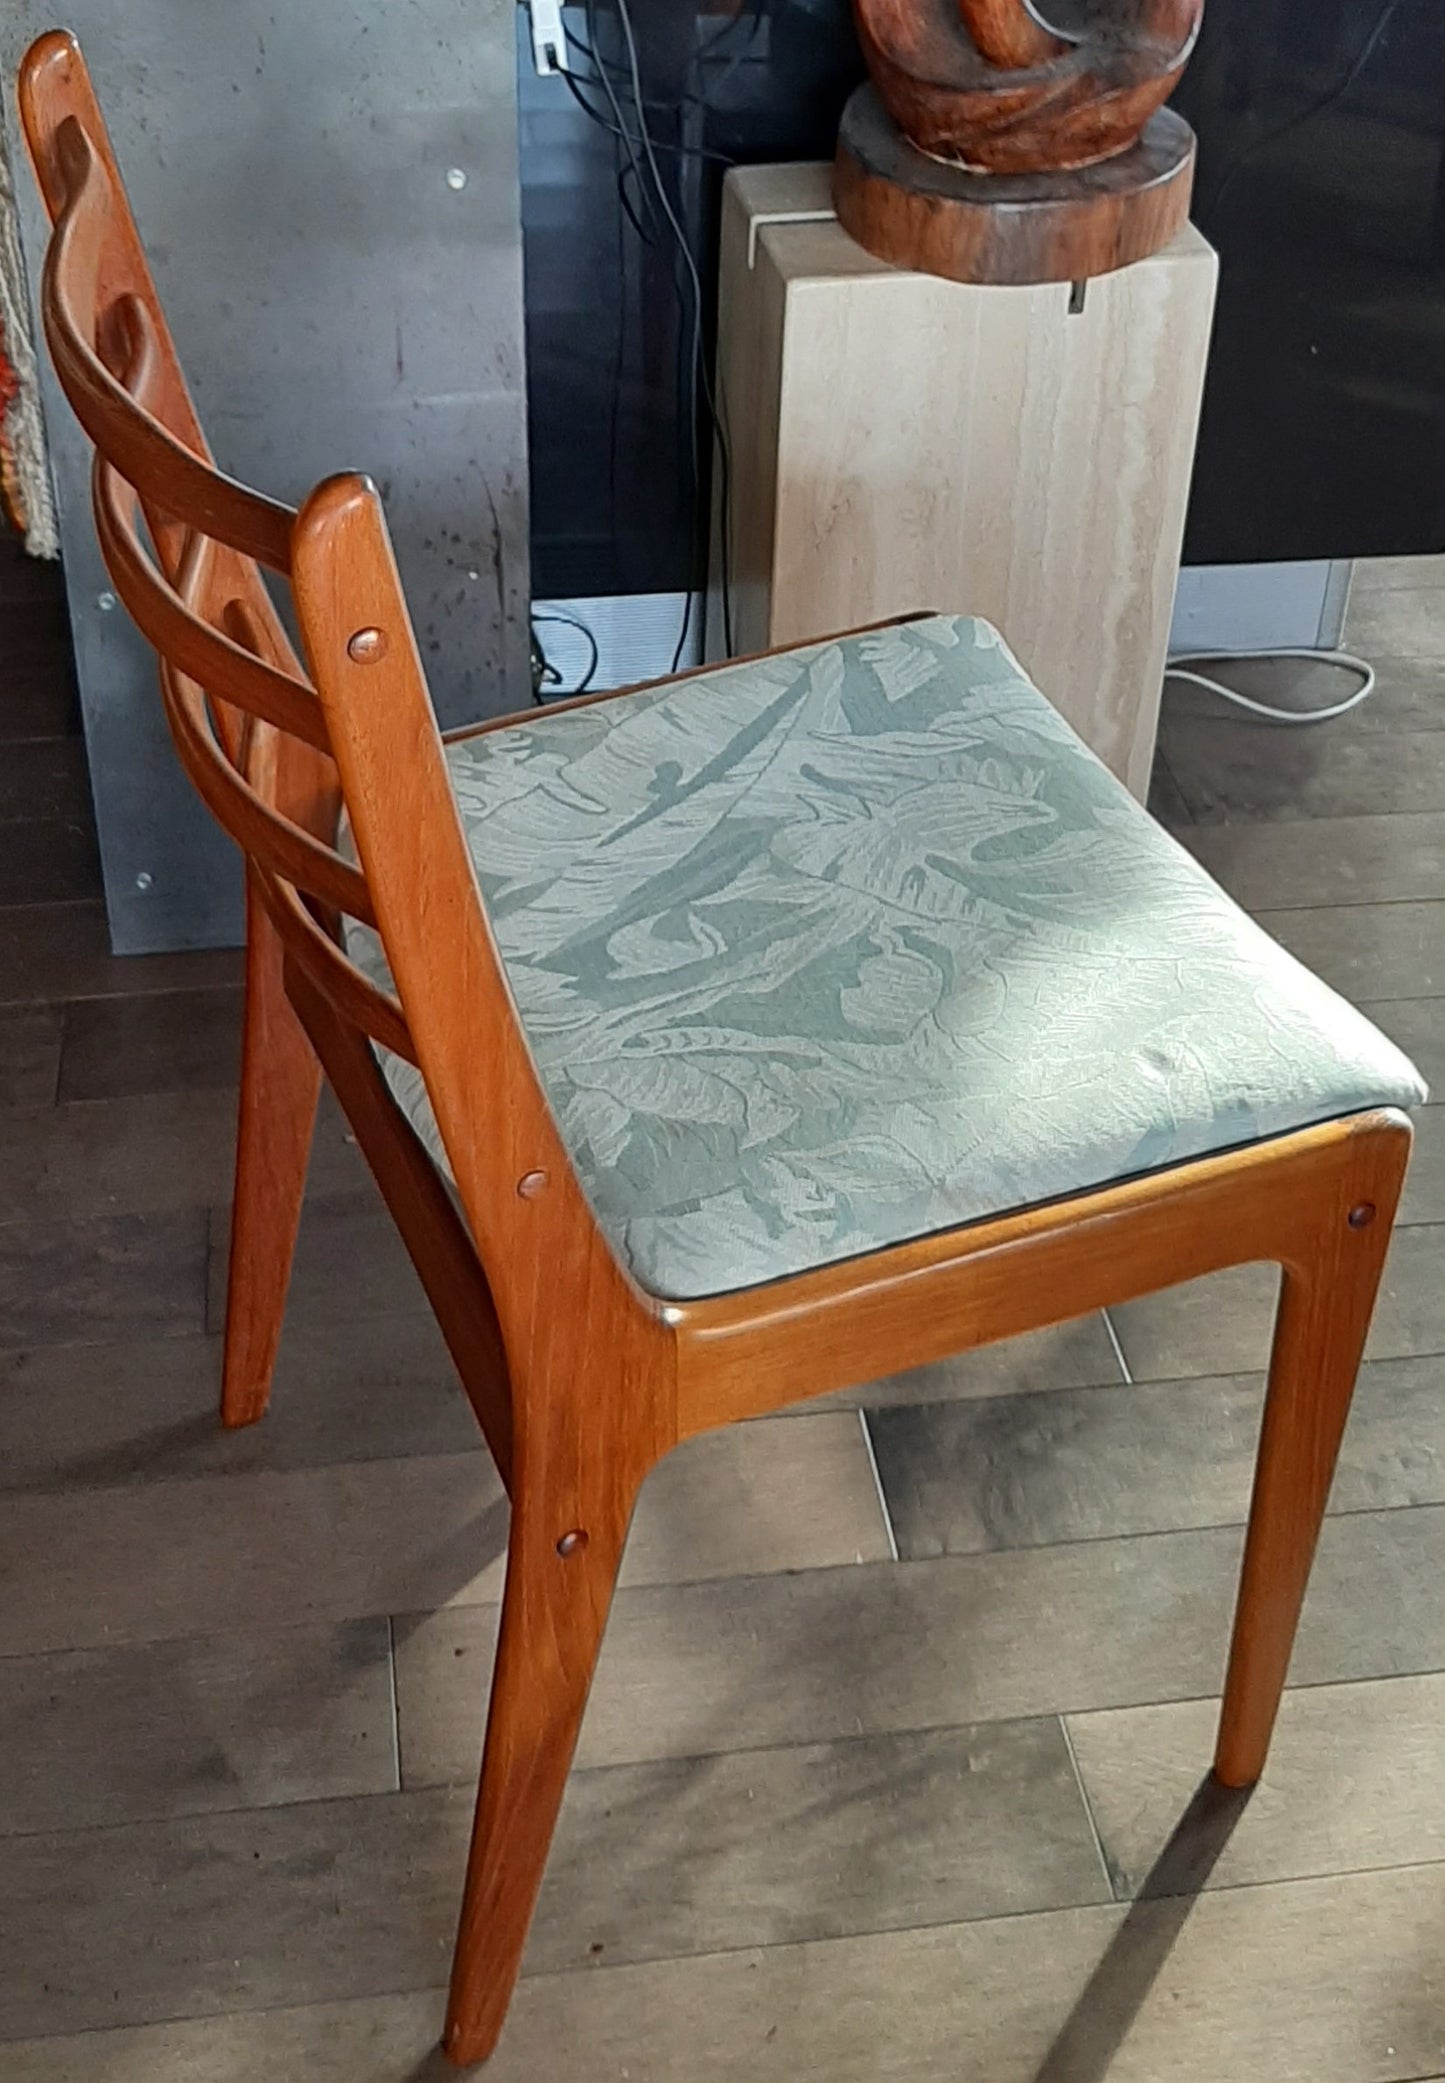 ON HOLD***4 Danish MCM Teak Chairs  RESTORED, perfect, each $249 only - Mid Century Modern Toronto